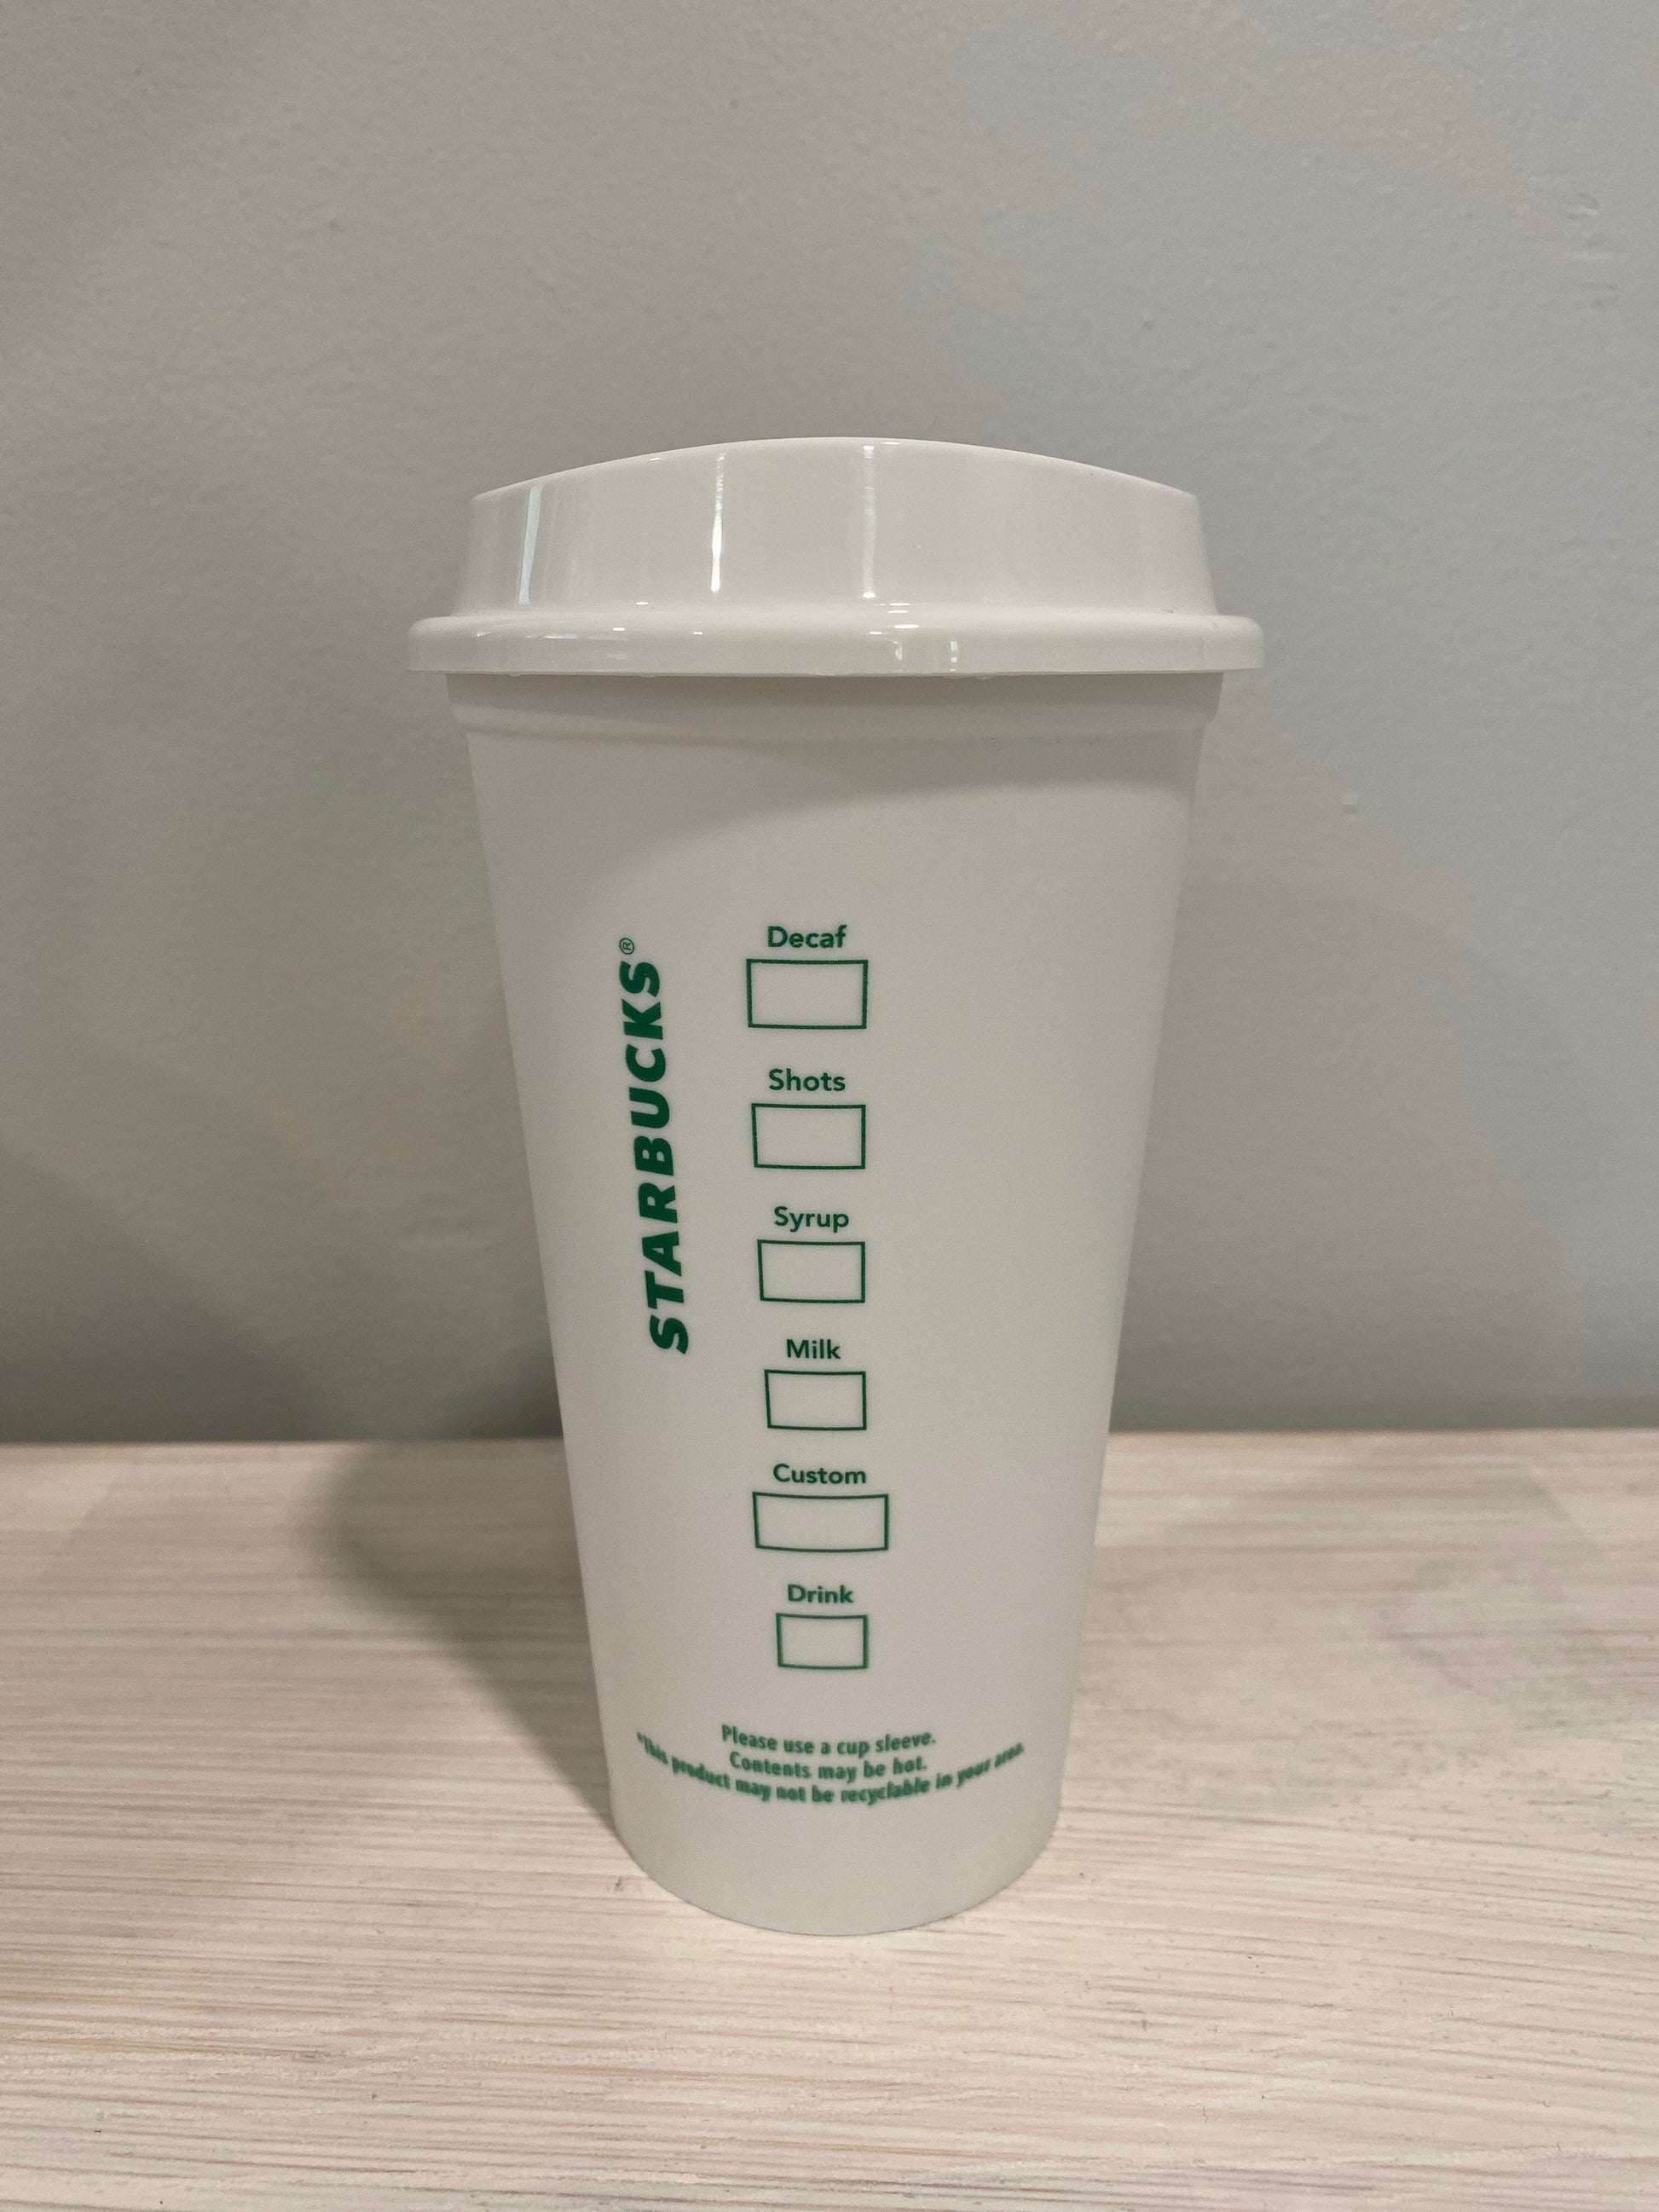 Sunflower Starbucks Coffee Cup – Acential